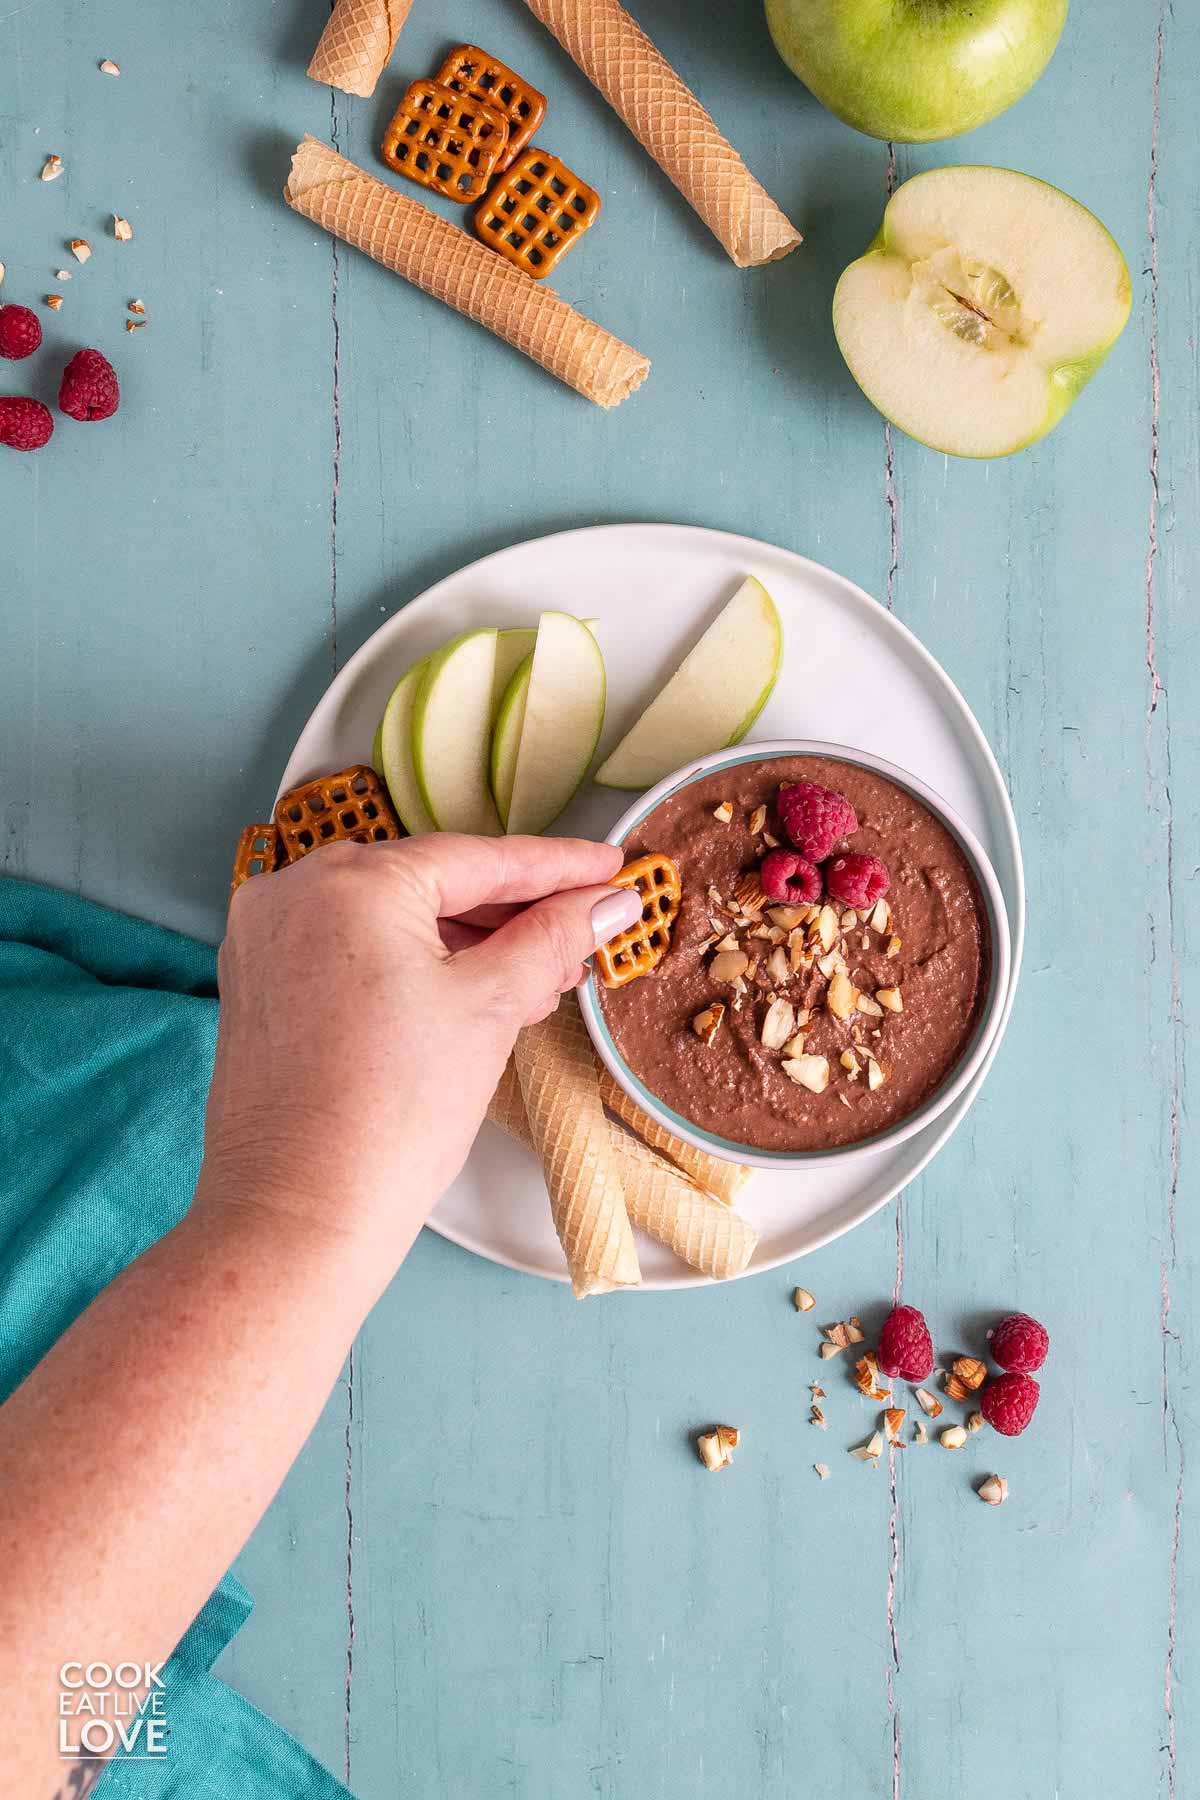 A bowl of dark chocolate hummus on the table with apple slices, pretzels and cookies and a hand dipping in a pretzel.